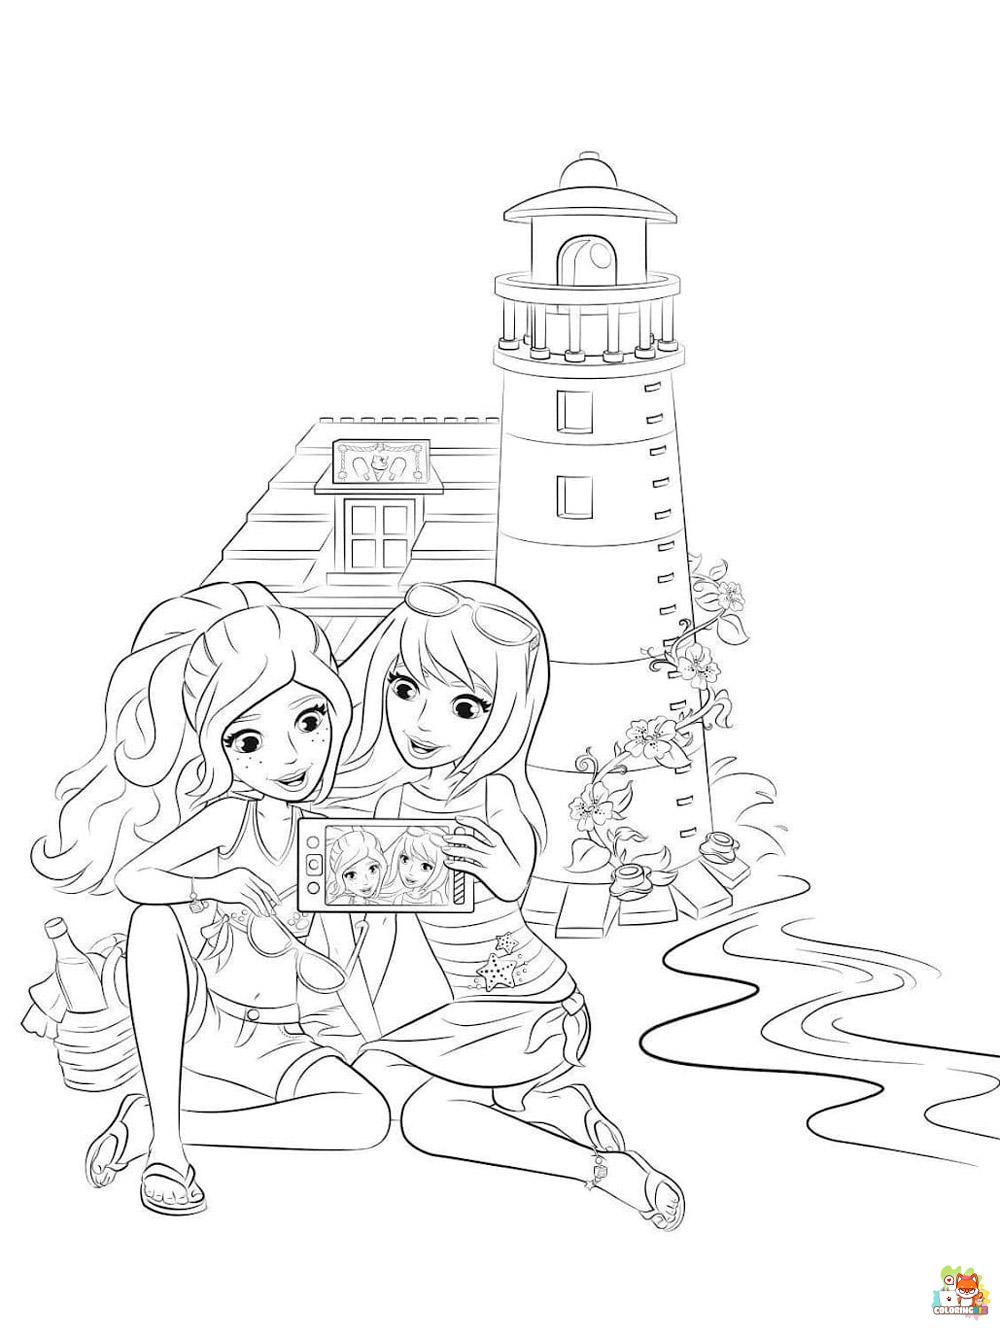 Lego Friends Coloring Pages 8